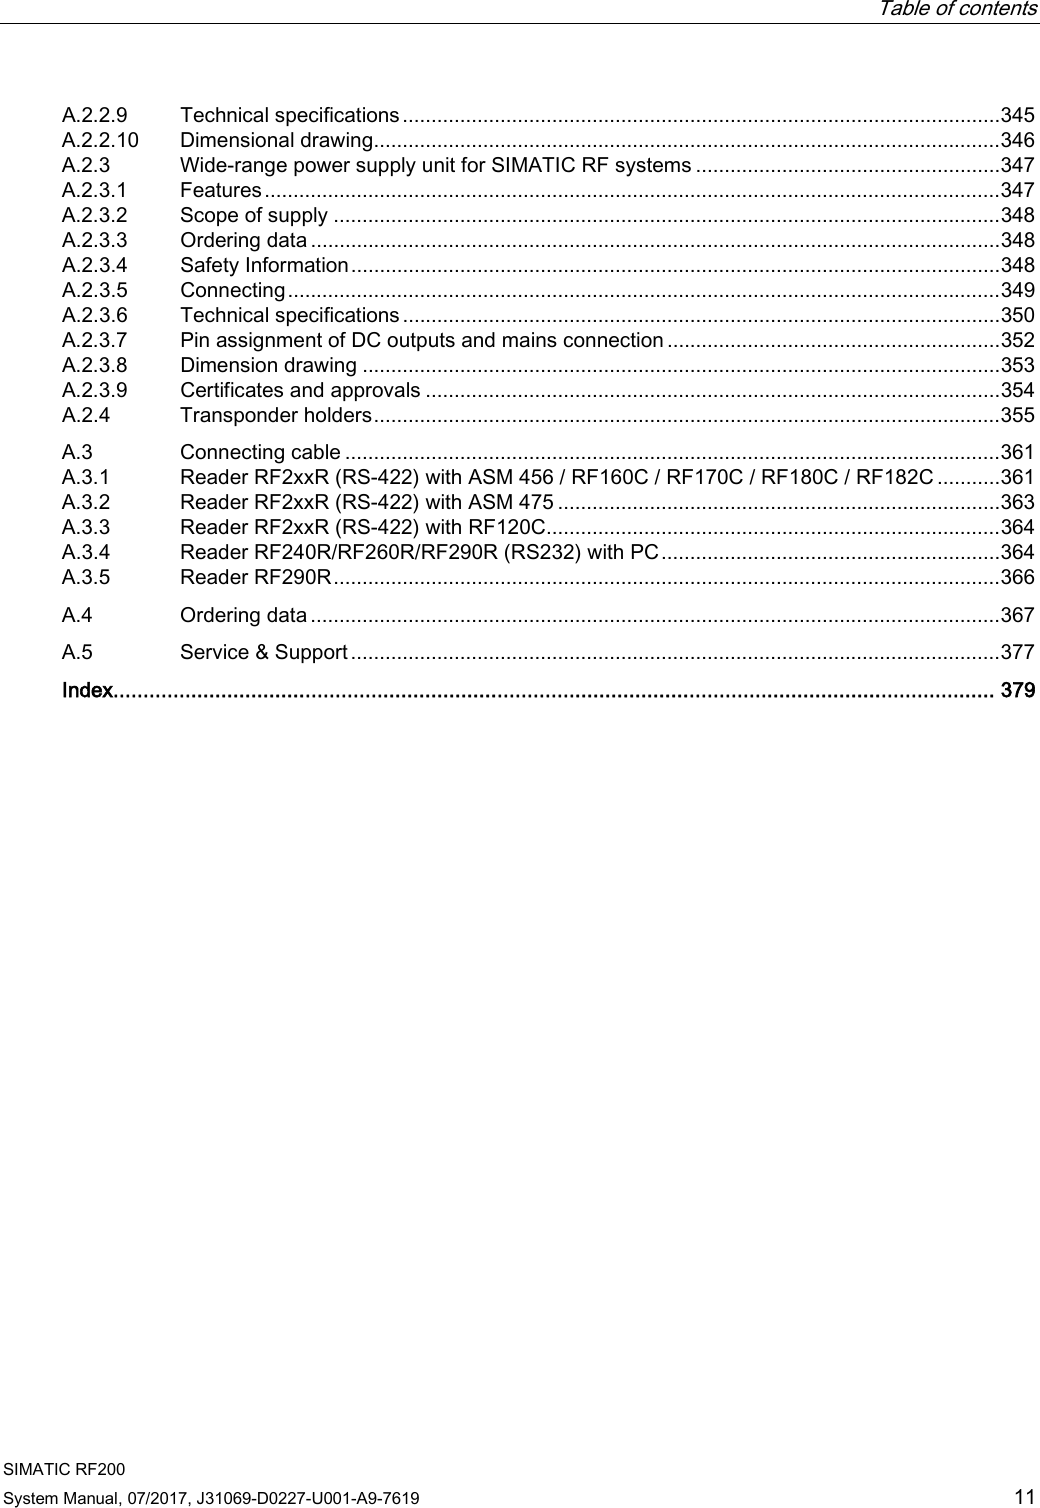  Table of contents  SIMATIC RF200 System Manual, 07/2017, J31069-D0227-U001-A9-7619 11 A.2.2.9 Technical specifications ........................................................................................................ 345 A.2.2.10 Dimensional drawing............................................................................................................. 346 A.2.3 Wide-range power supply unit for SIMATIC RF systems ..................................................... 347 A.2.3.1 Features ................................................................................................................................ 347 A.2.3.2 Scope of supply .................................................................................................................... 348 A.2.3.3 Ordering data ........................................................................................................................ 348 A.2.3.4 Safety Information ................................................................................................................. 348 A.2.3.5 Connecting ............................................................................................................................ 349 A.2.3.6 Technical specifications ........................................................................................................ 350 A.2.3.7 Pin assignment of DC outputs and mains connection .......................................................... 352 A.2.3.8 Dimension drawing ............................................................................................................... 353 A.2.3.9 Certificates and approvals .................................................................................................... 354 A.2.4 Transponder holders ............................................................................................................. 355 A.3 Connecting cable .................................................................................................................. 361 A.3.1 Reader RF2xxR (RS-422) with ASM 456 / RF160C / RF170C / RF180C / RF182C ........... 361 A.3.2 Reader RF2xxR (RS-422) with ASM 475 ............................................................................. 363 A.3.3 Reader RF2xxR (RS-422) with RF120C............................................................................... 364 A.3.4 Reader RF240R/RF260R/RF290R (RS232) with PC ........................................................... 364 A.3.5 Reader RF290R .................................................................................................................... 366 A.4 Ordering data ........................................................................................................................ 367 A.5 Service &amp; Support ................................................................................................................. 377  Index................................................................................................................................................... 379 